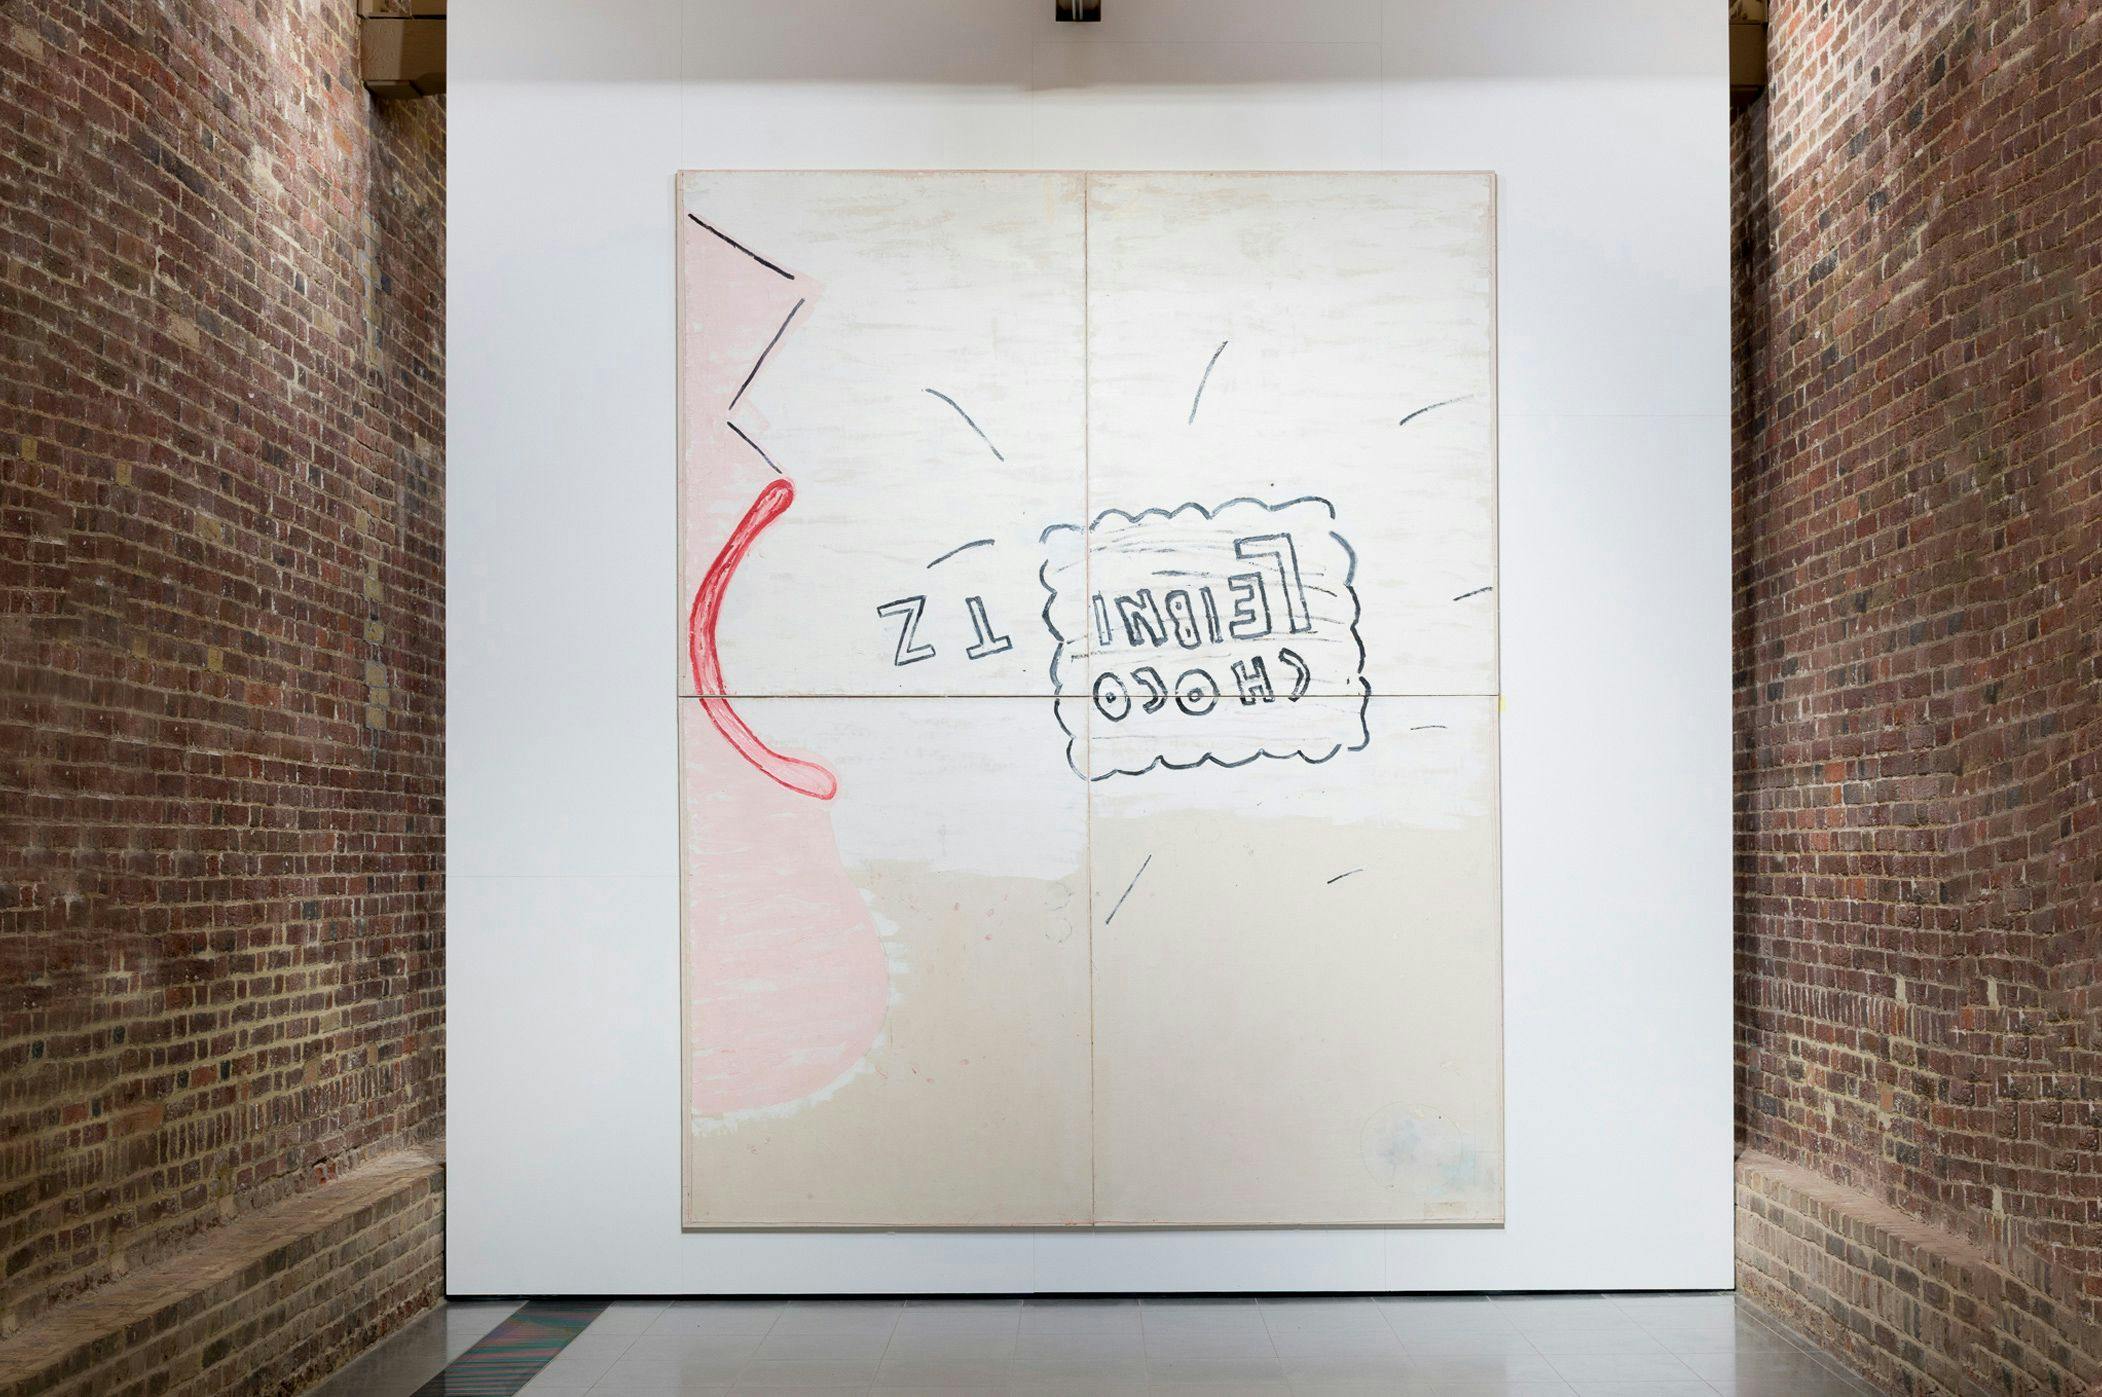 Installation view of the exhibition, Rose Wylie: Quack Quack, at Serpentine North Gallery in London, dated 2017 to 2018.